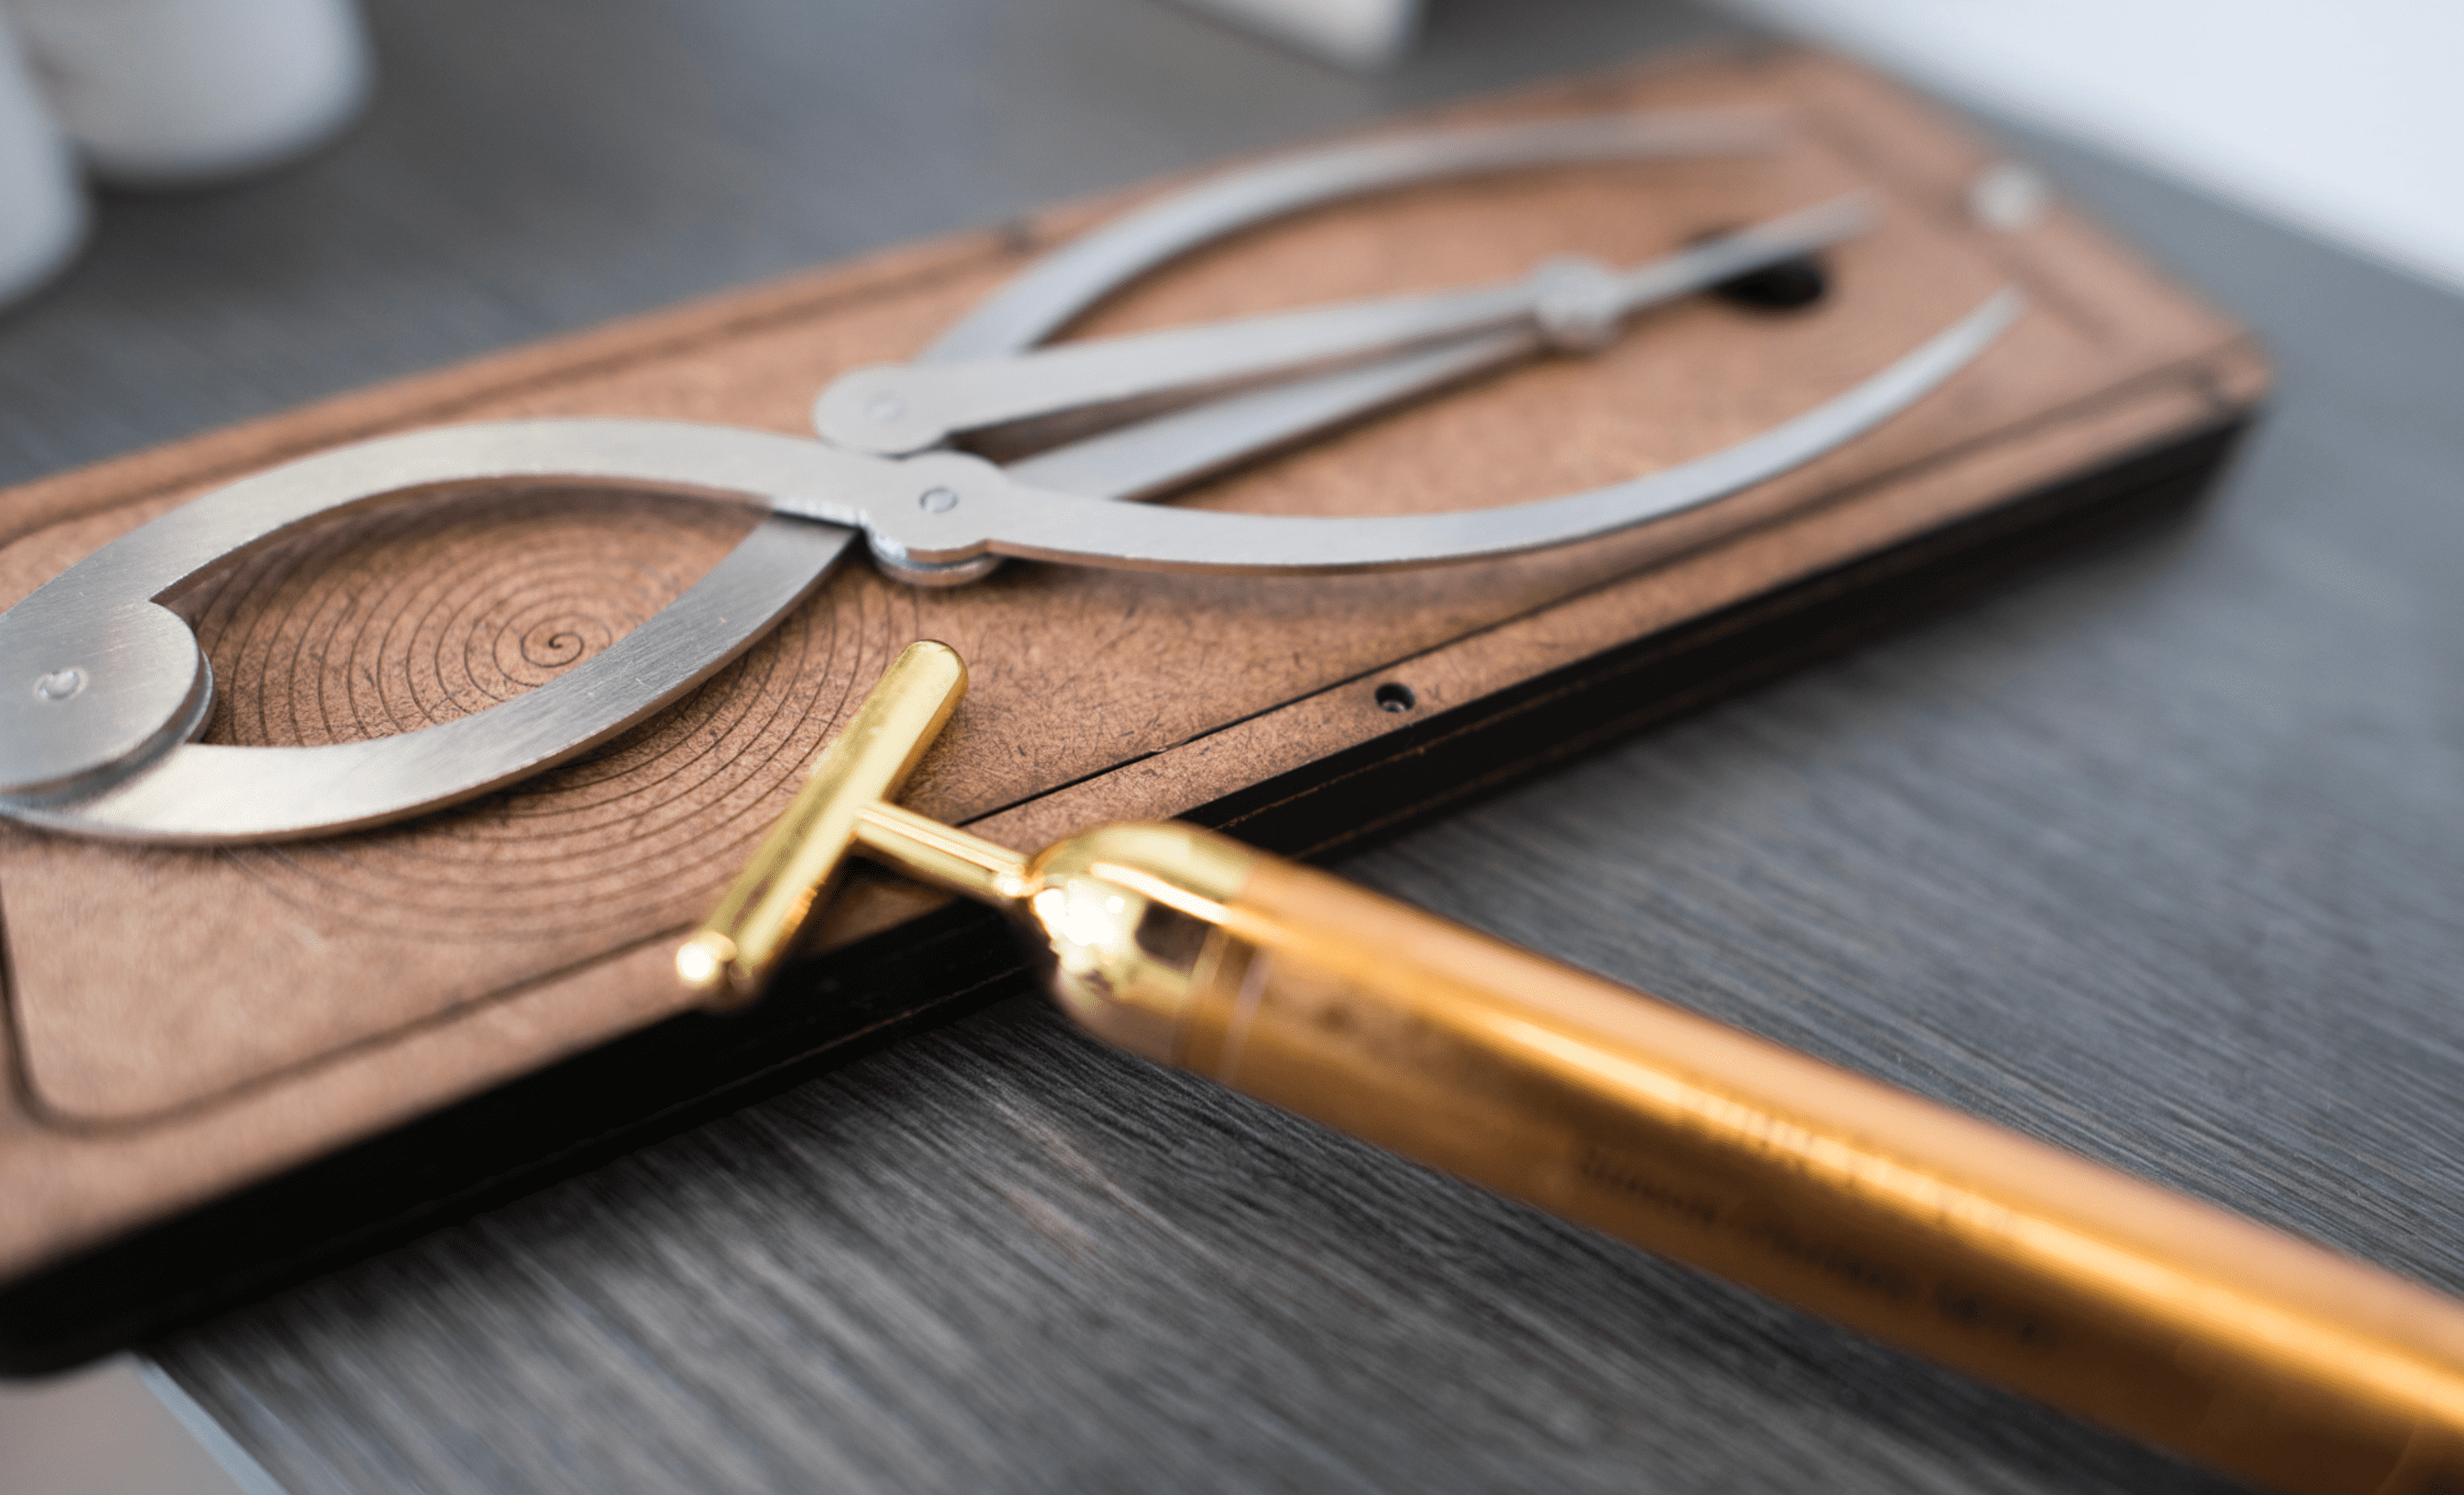 A close-up image of a wooden drawing board with a pair of large compasses and a golden mechanical pencil resting on it. The focus is sharp on the metallic elements of the tools, portraying them as precise measuring and accuracy in treatment.